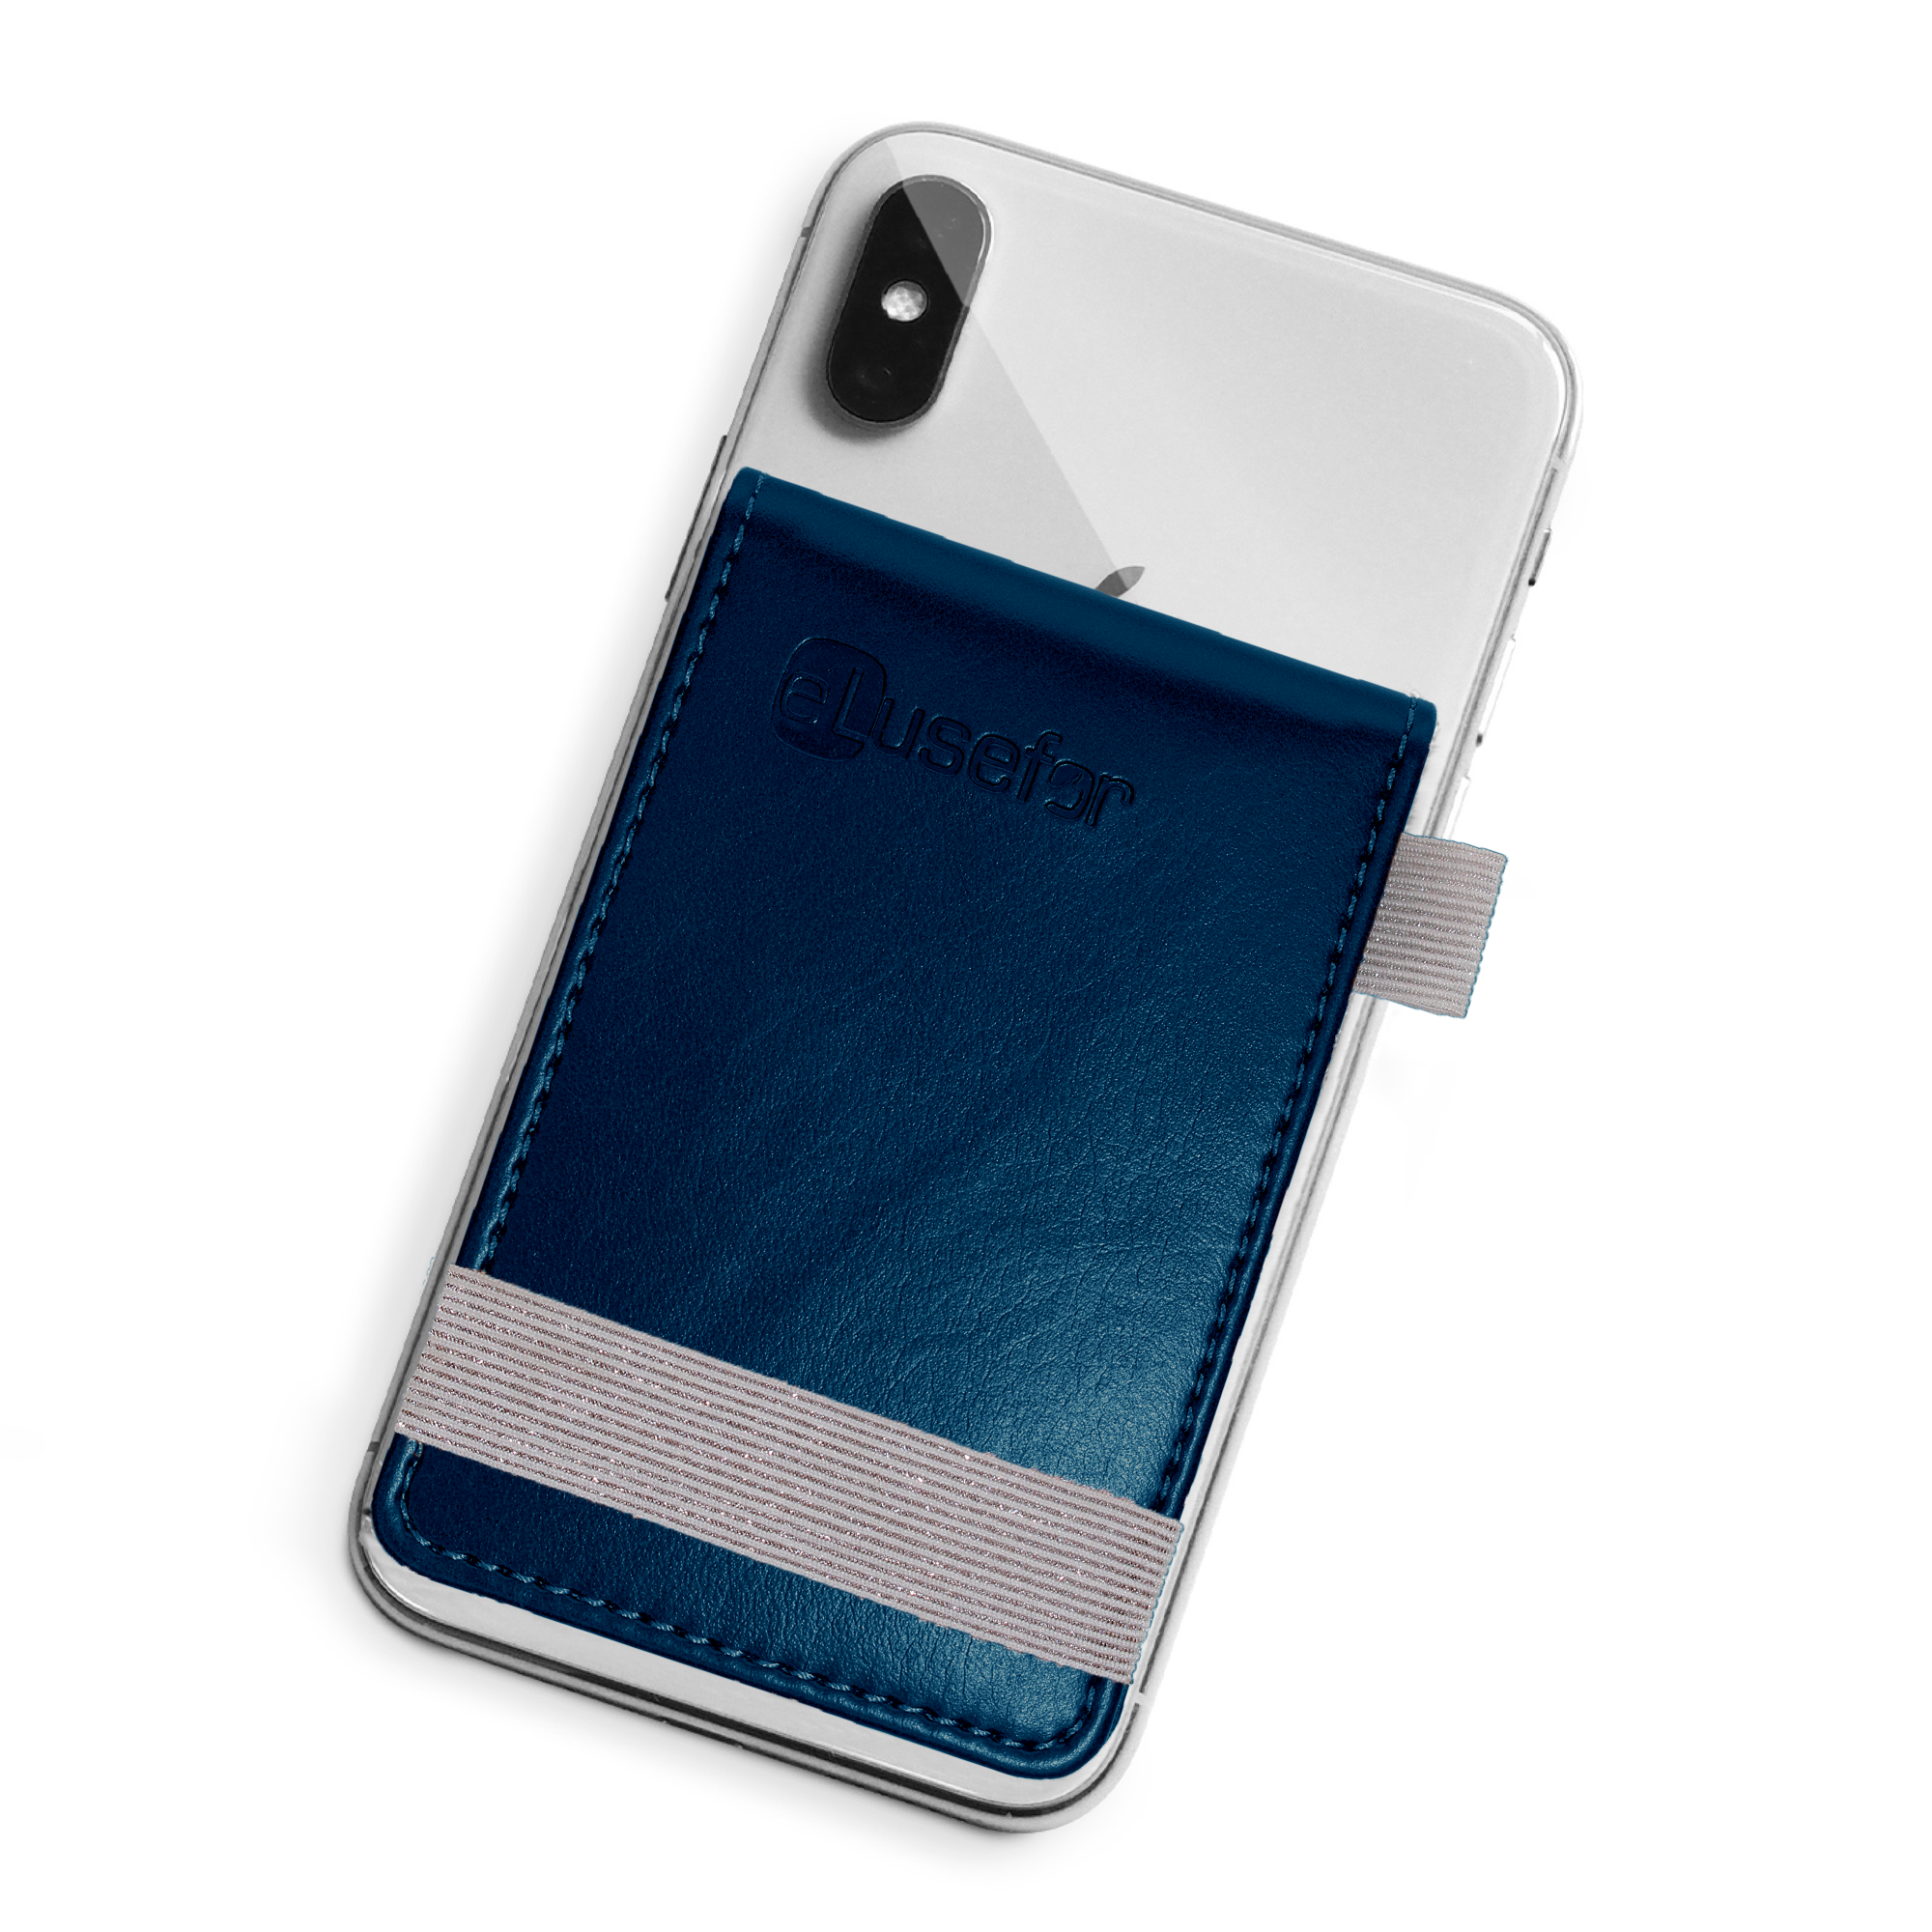 Liam Stick-on Phone Wallet for 6 Cards, Cash, IDs and more